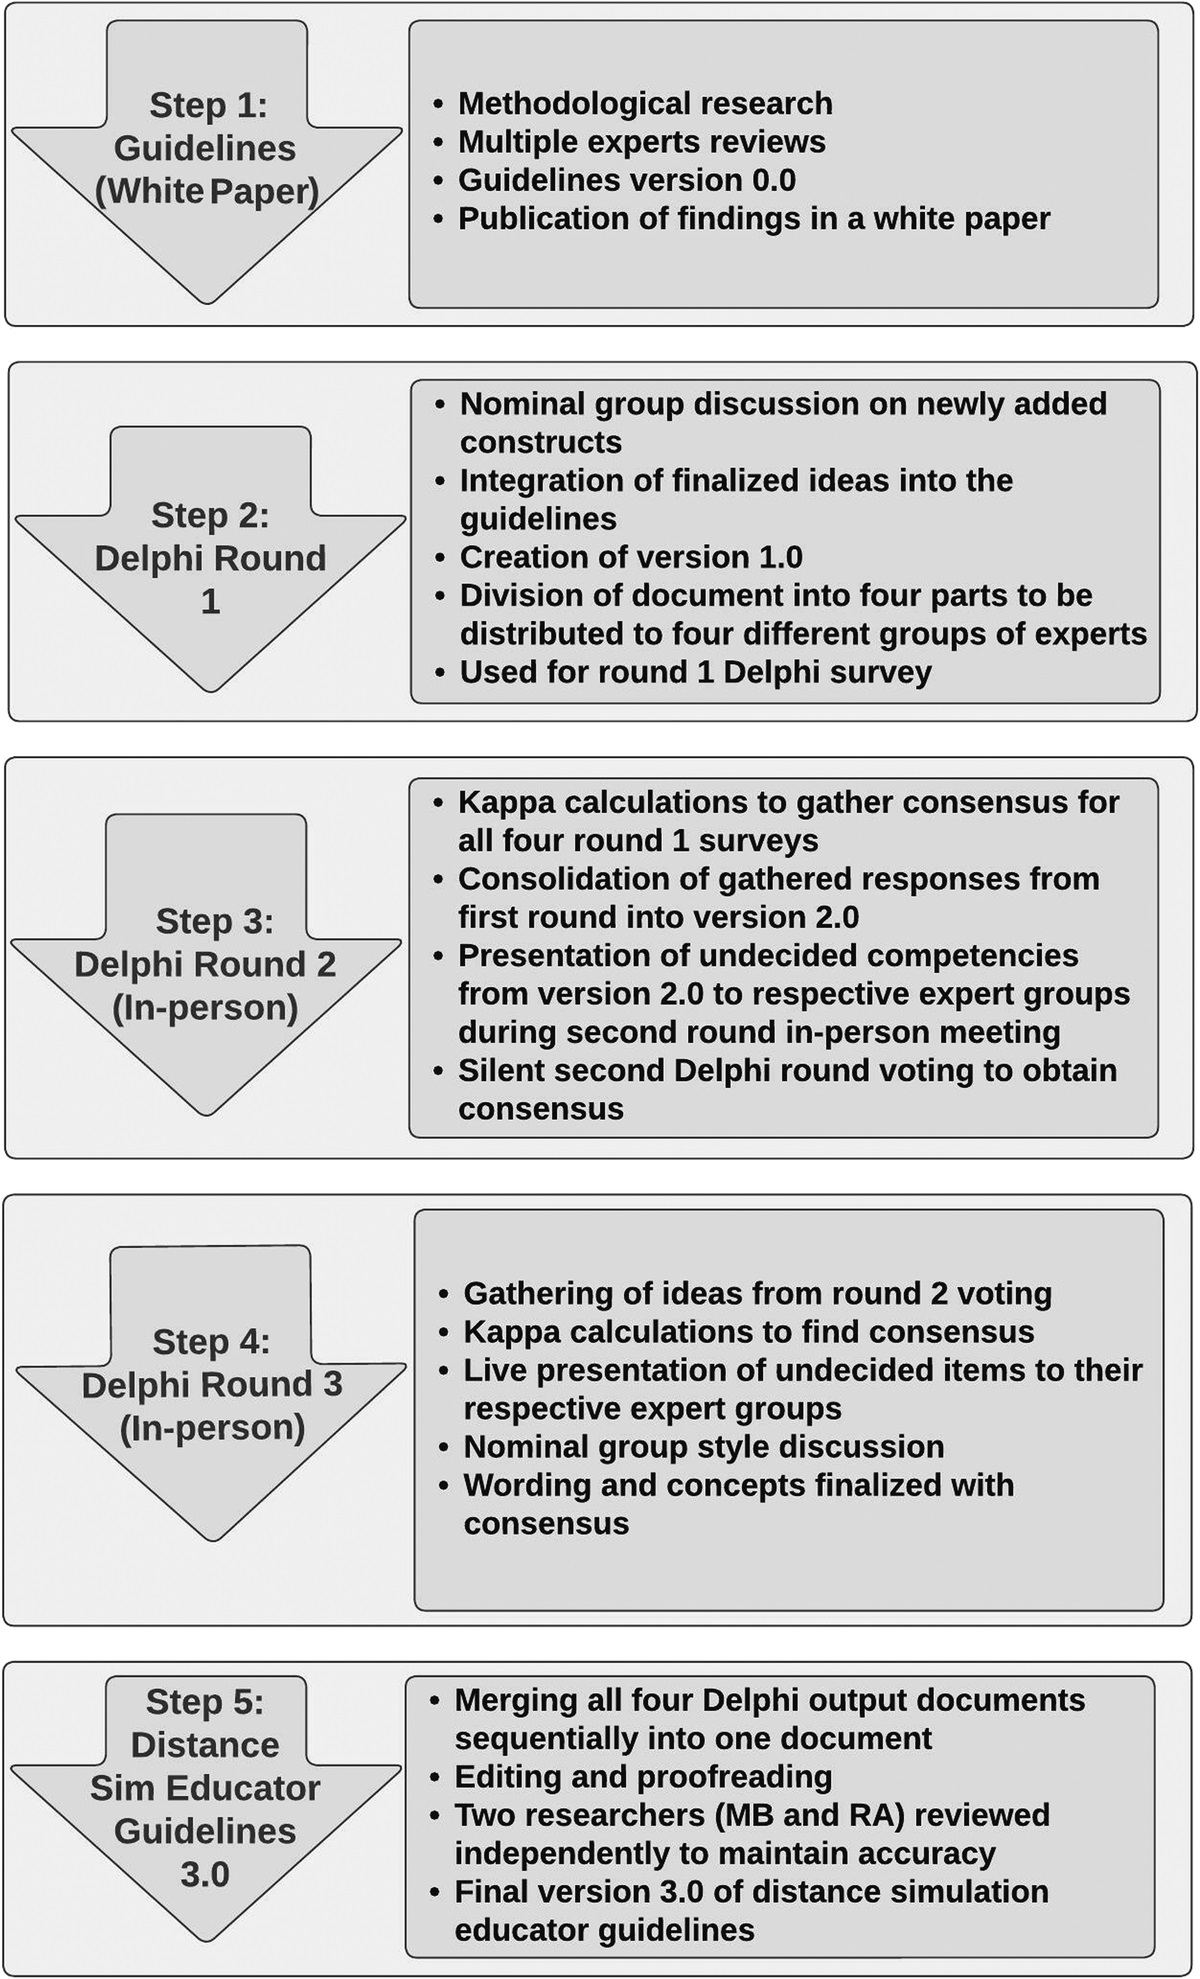 Development of Distance Simulation Educator Guidelines in Healthcare: A Delphi Method Application